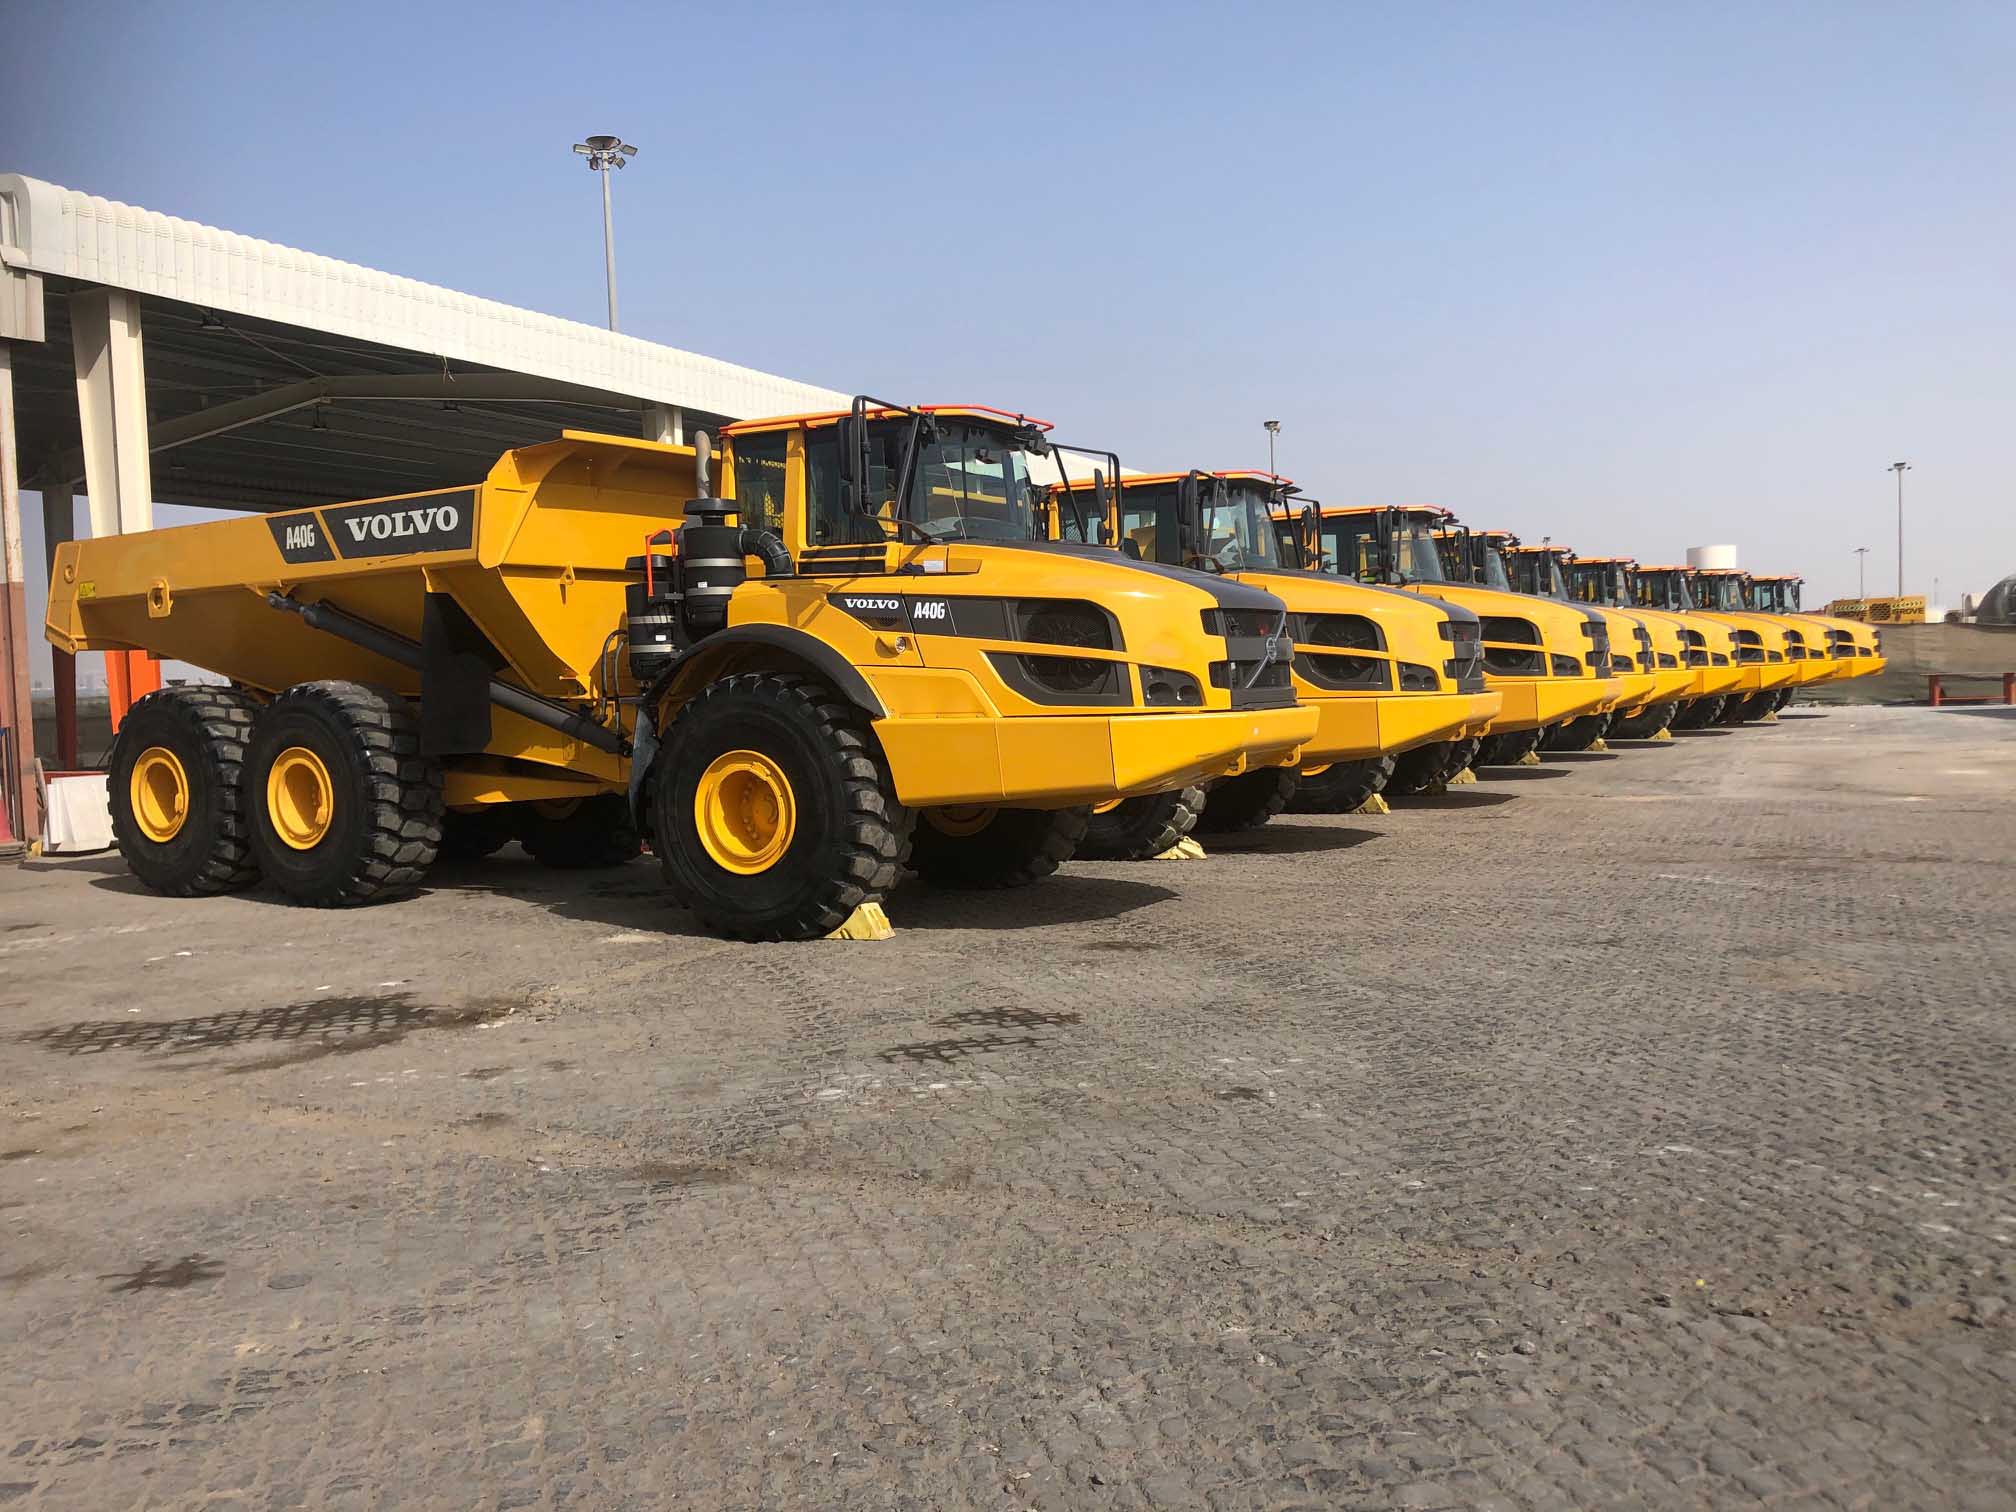 Volvo A40G - Used construction machines for sale in Mexico, Ghana & Chile - Southwest Global